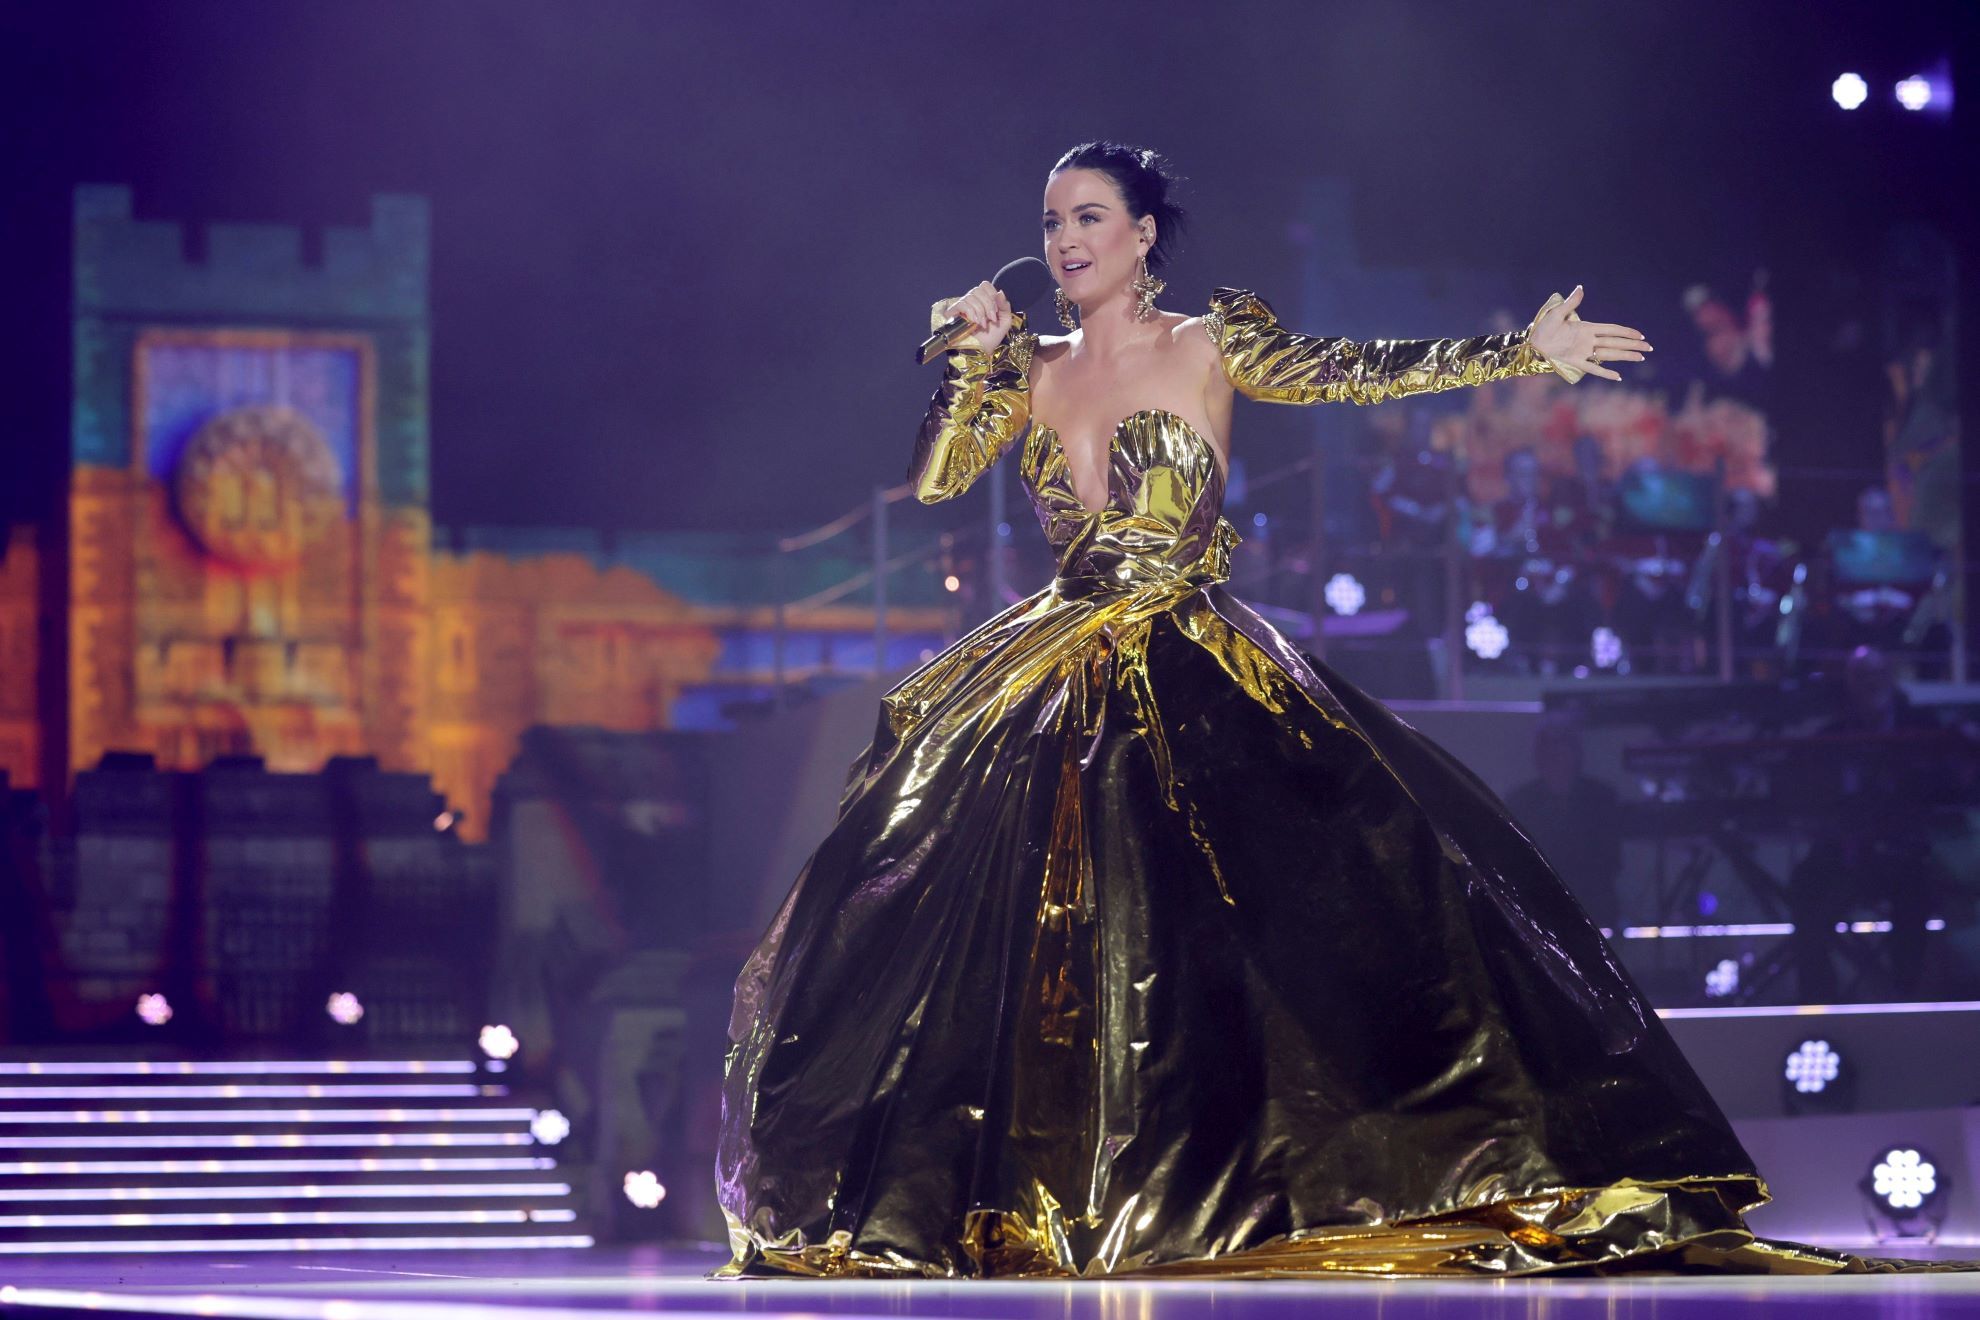 US singer Katy Perry performs on stage during a concert at Windsor Castle in Windsor.